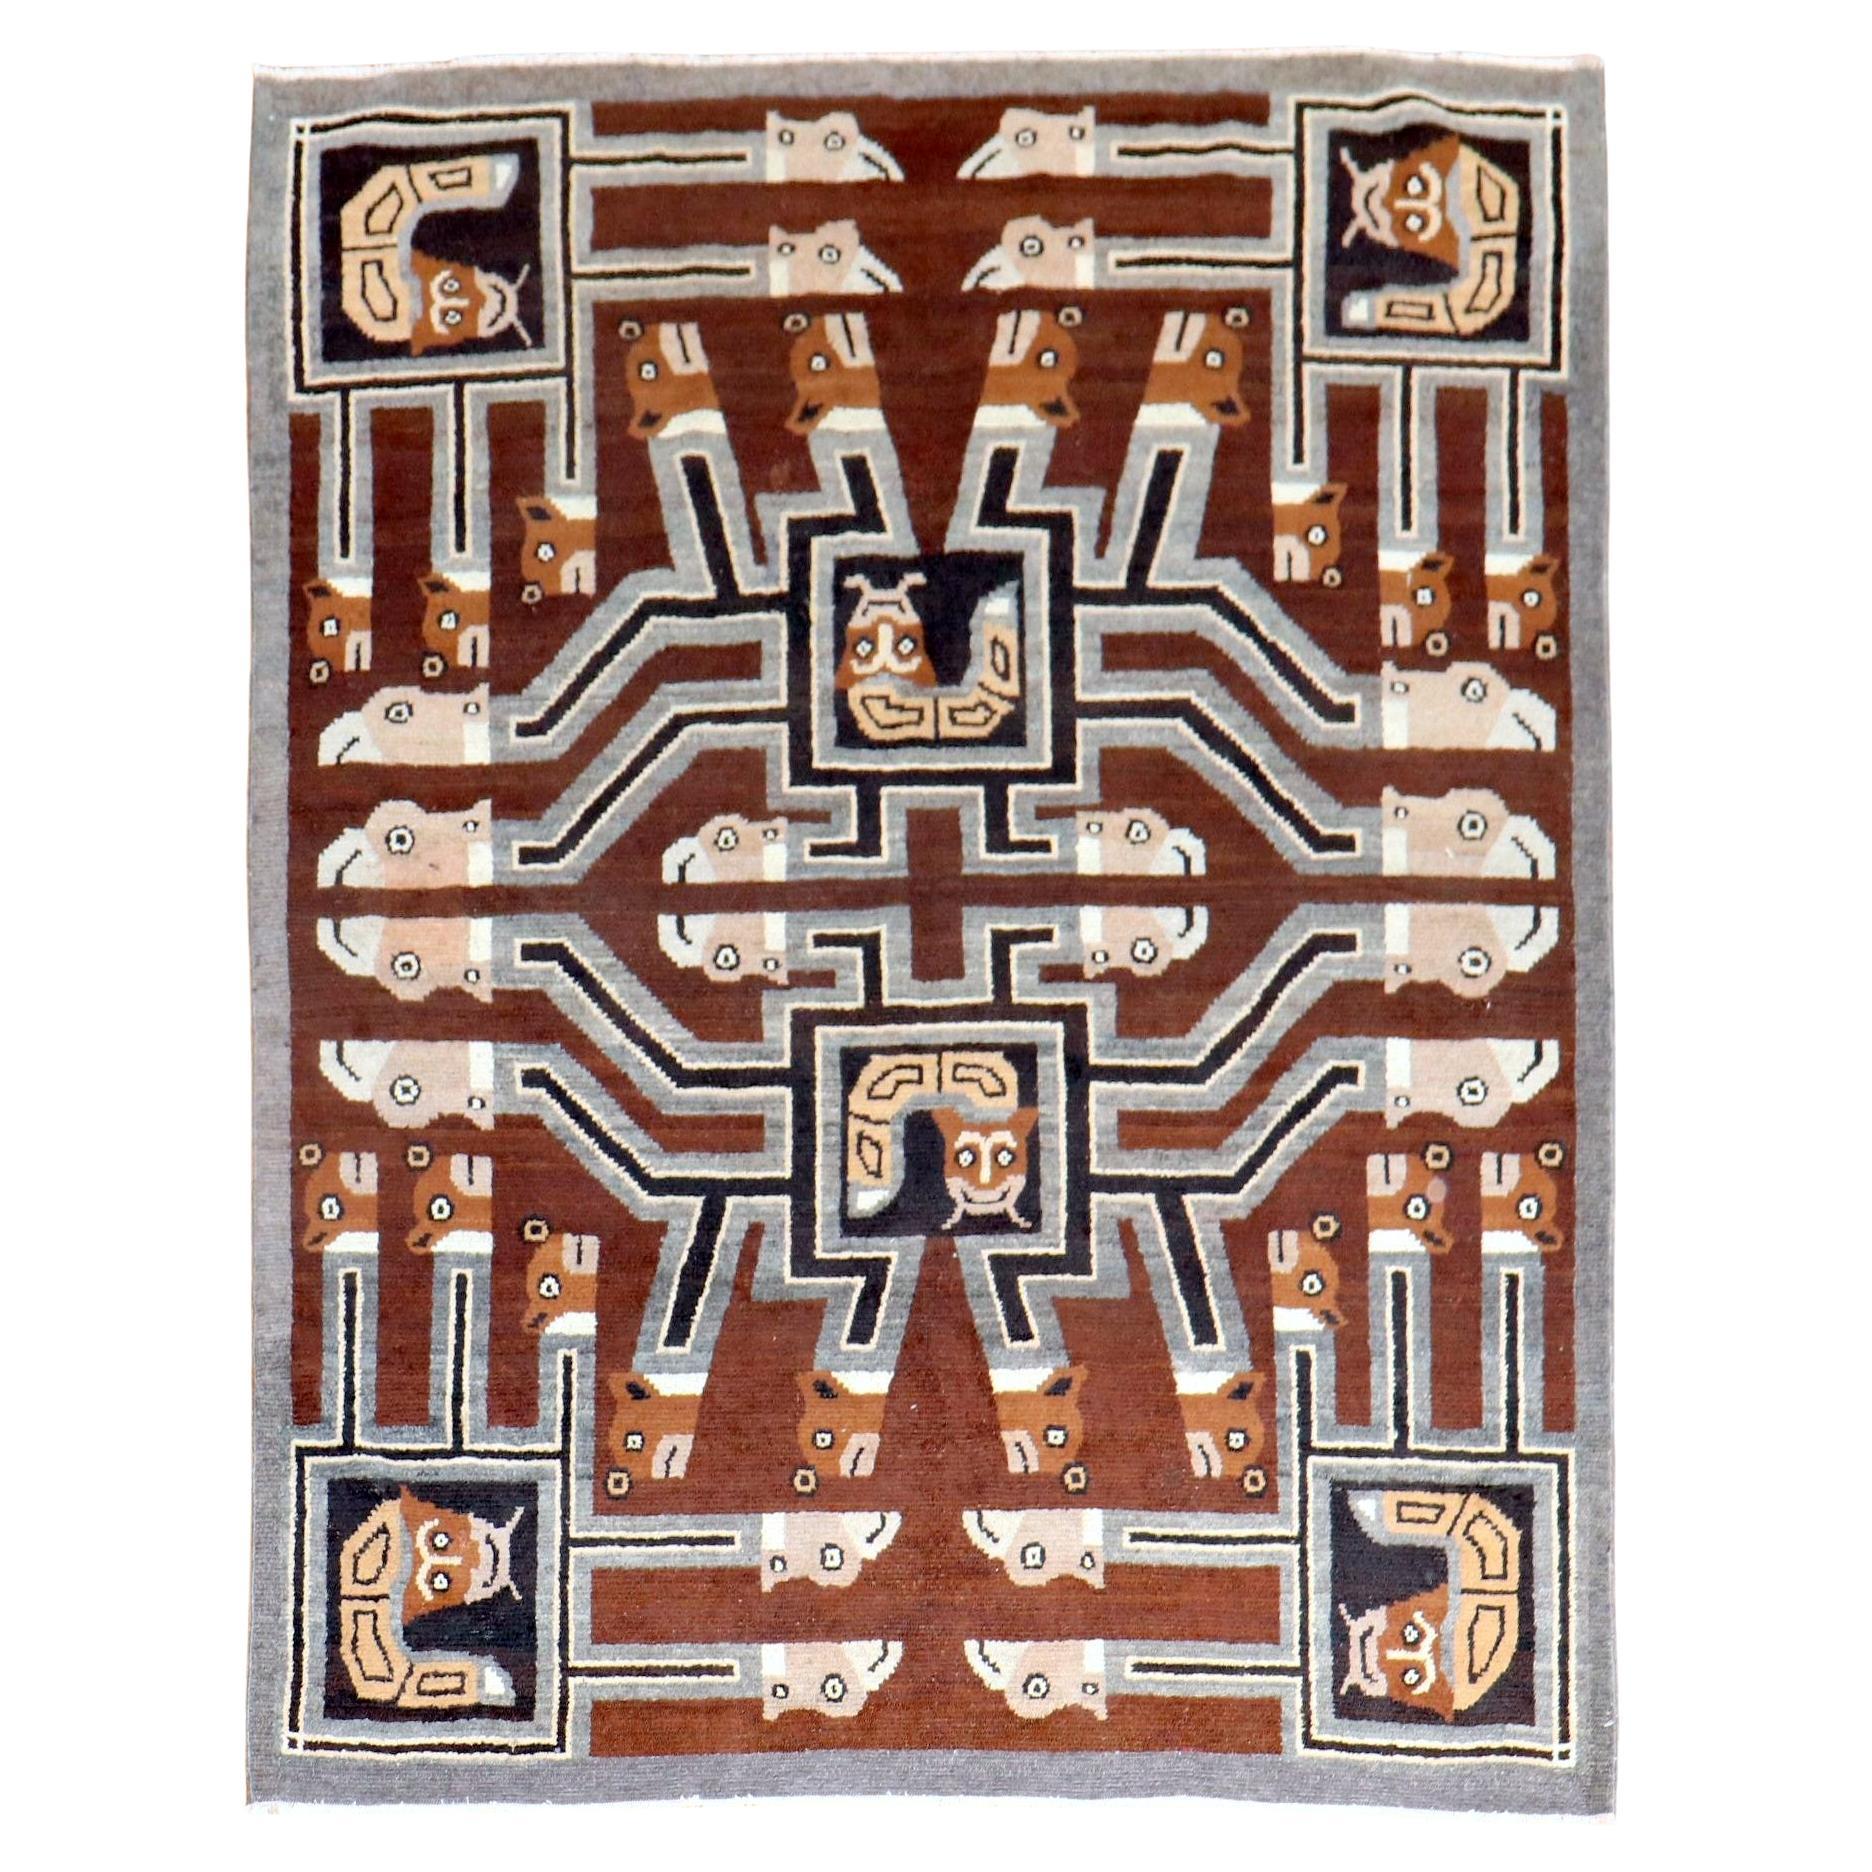 Indonesian Central Asian Rugs